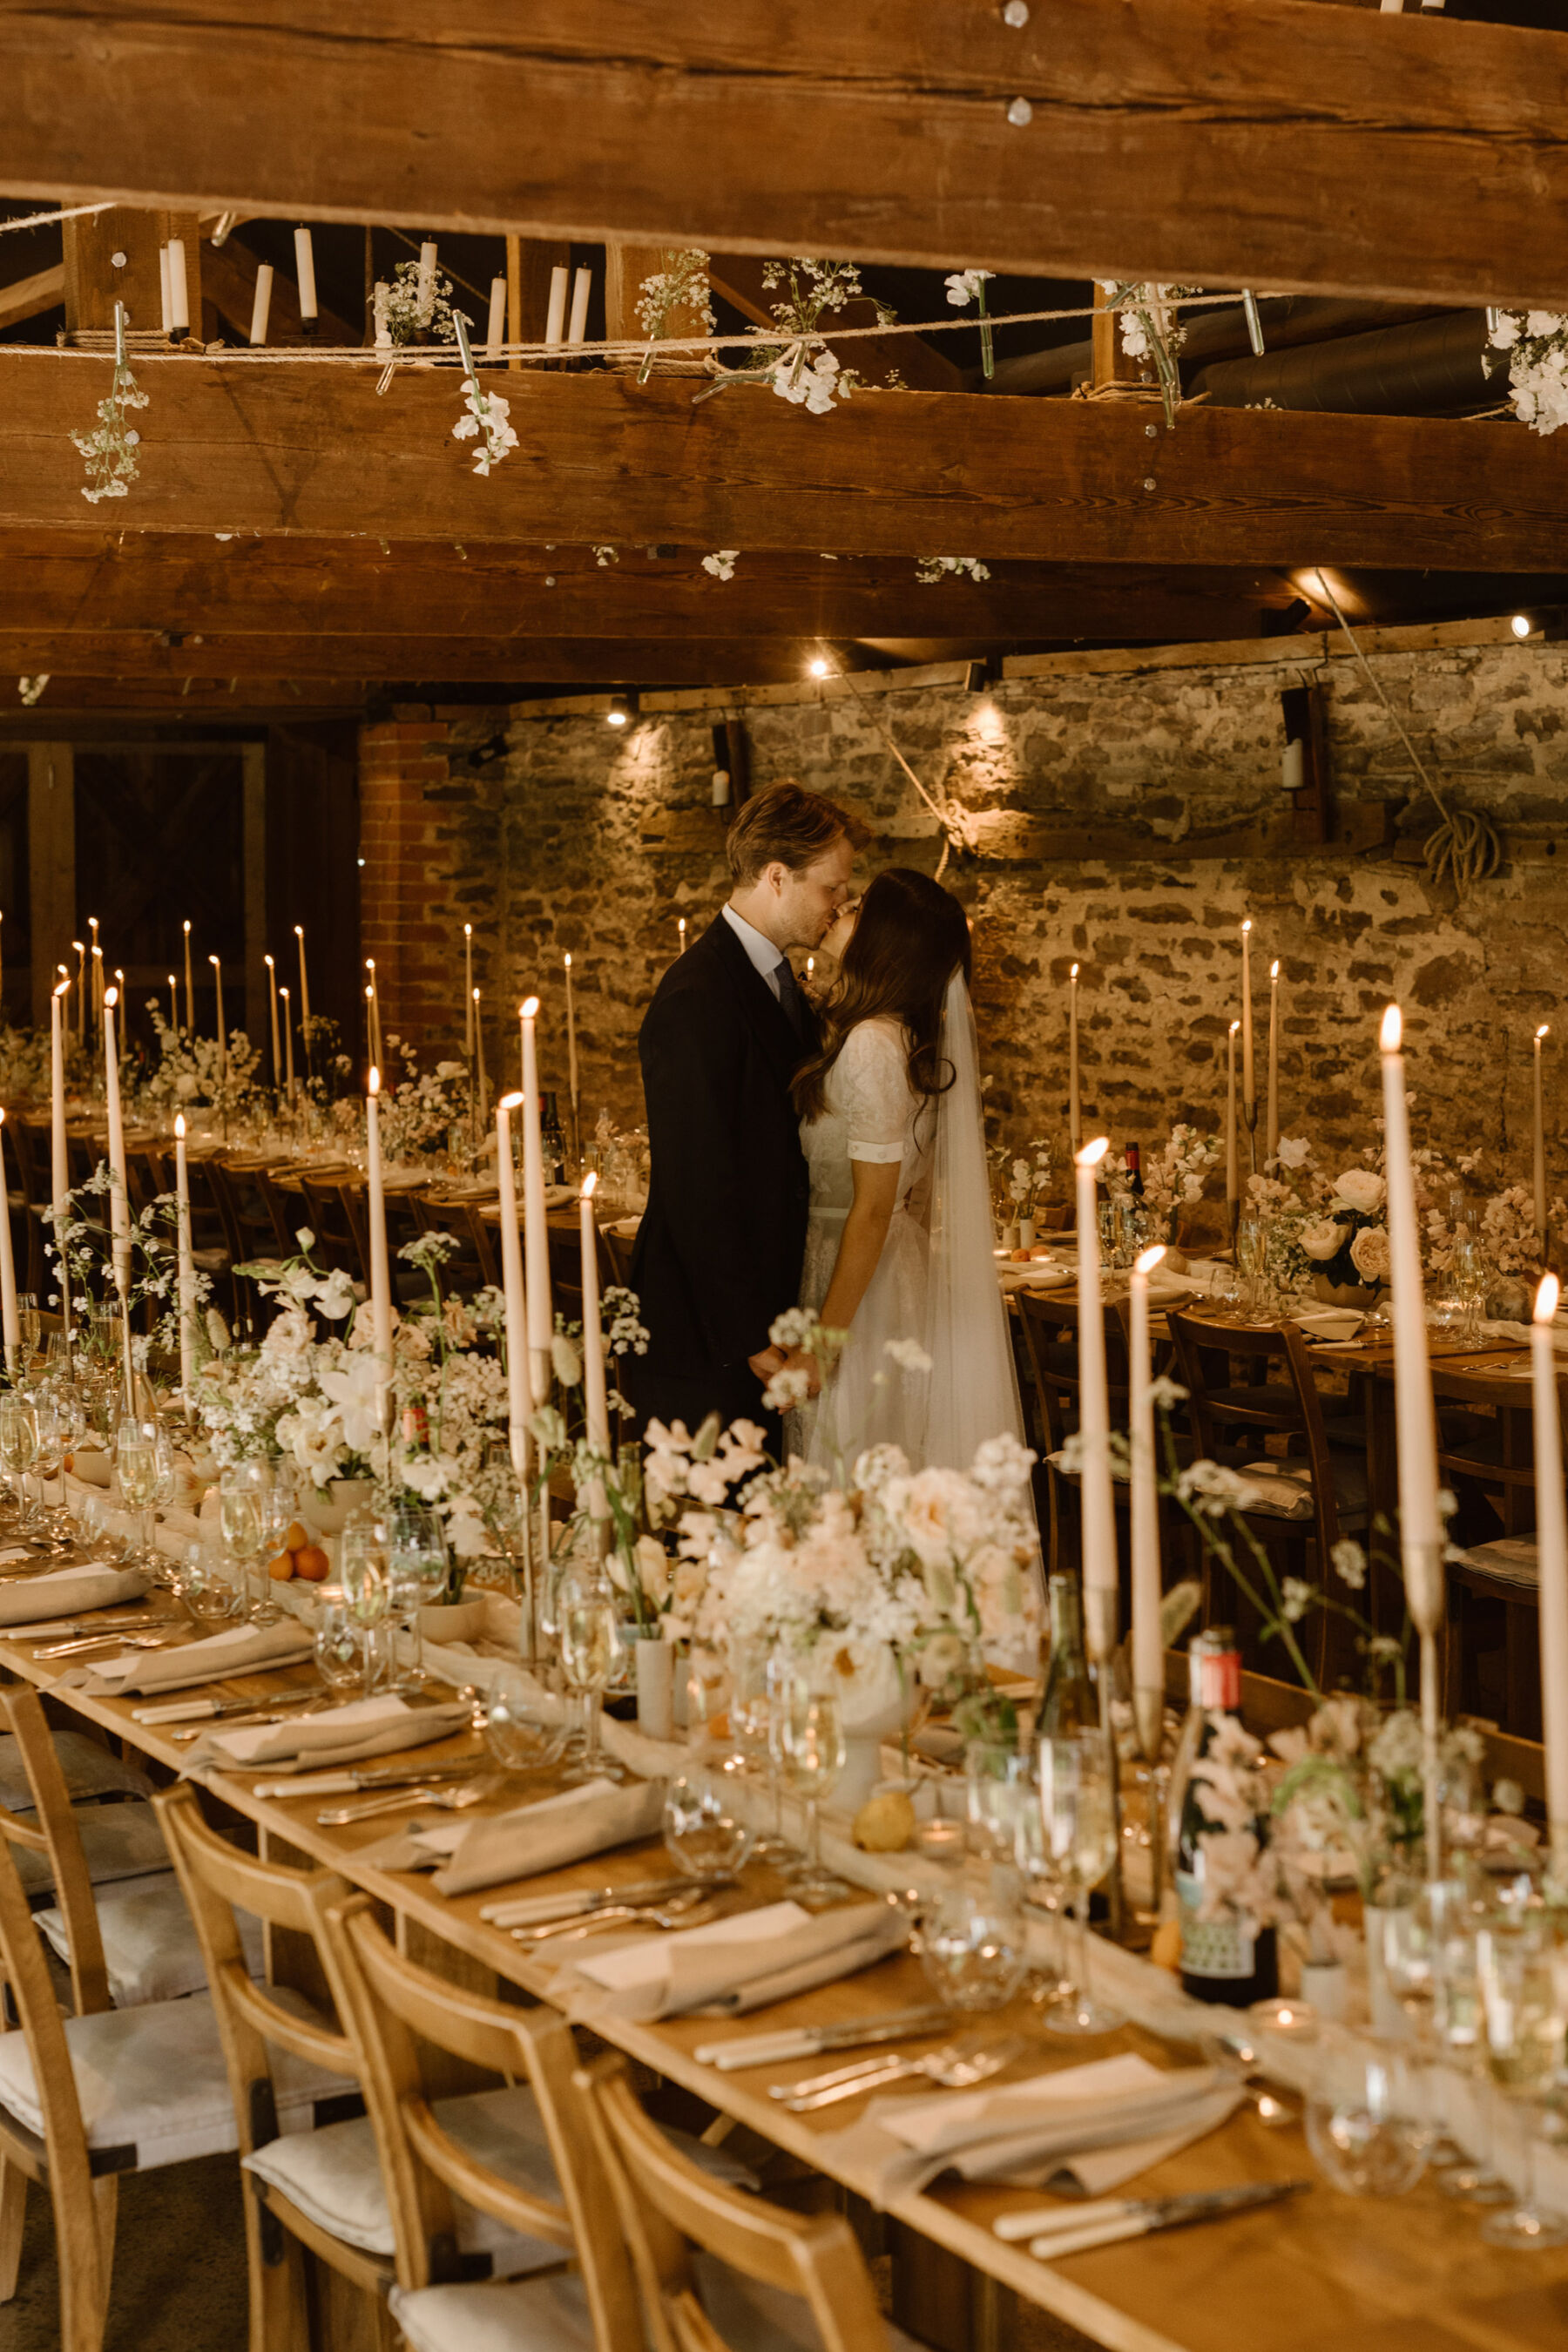 Wedding reception at Dewsall Court. Long wooden trestle tables with tall pink taper candles and pastel flowers. Agnes Black Photography.